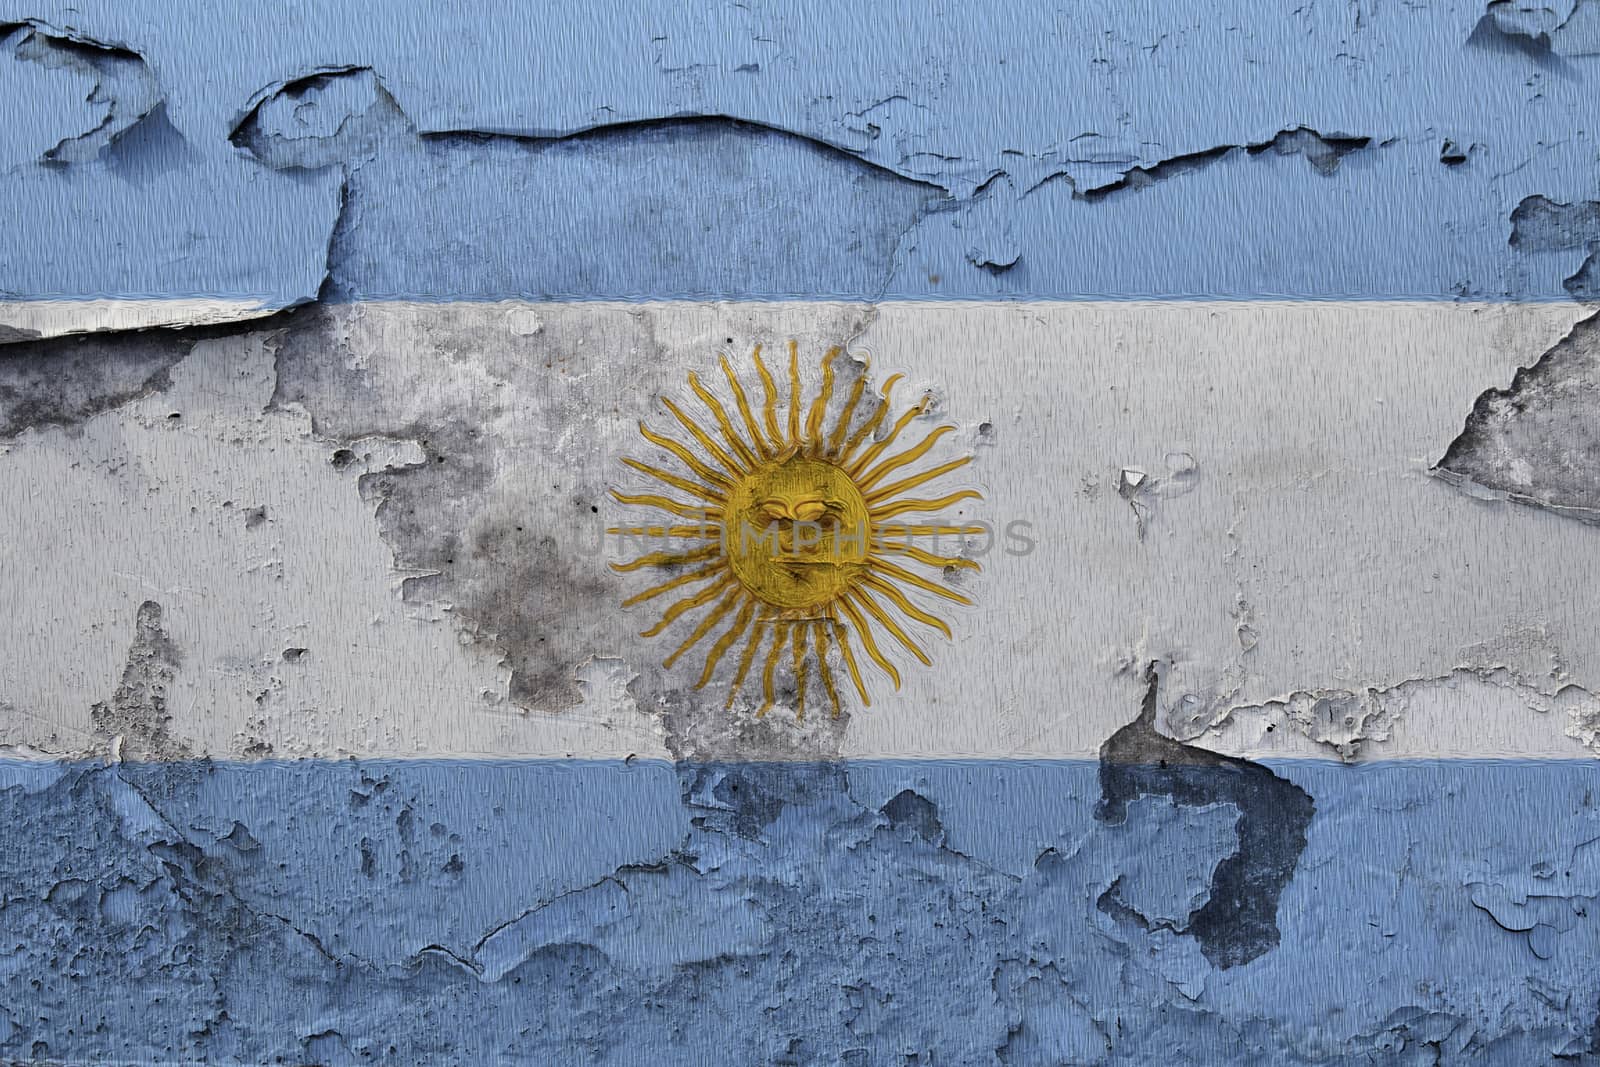 Argentina flag painted on the cracked grunge concrete wall by shaadjutt36